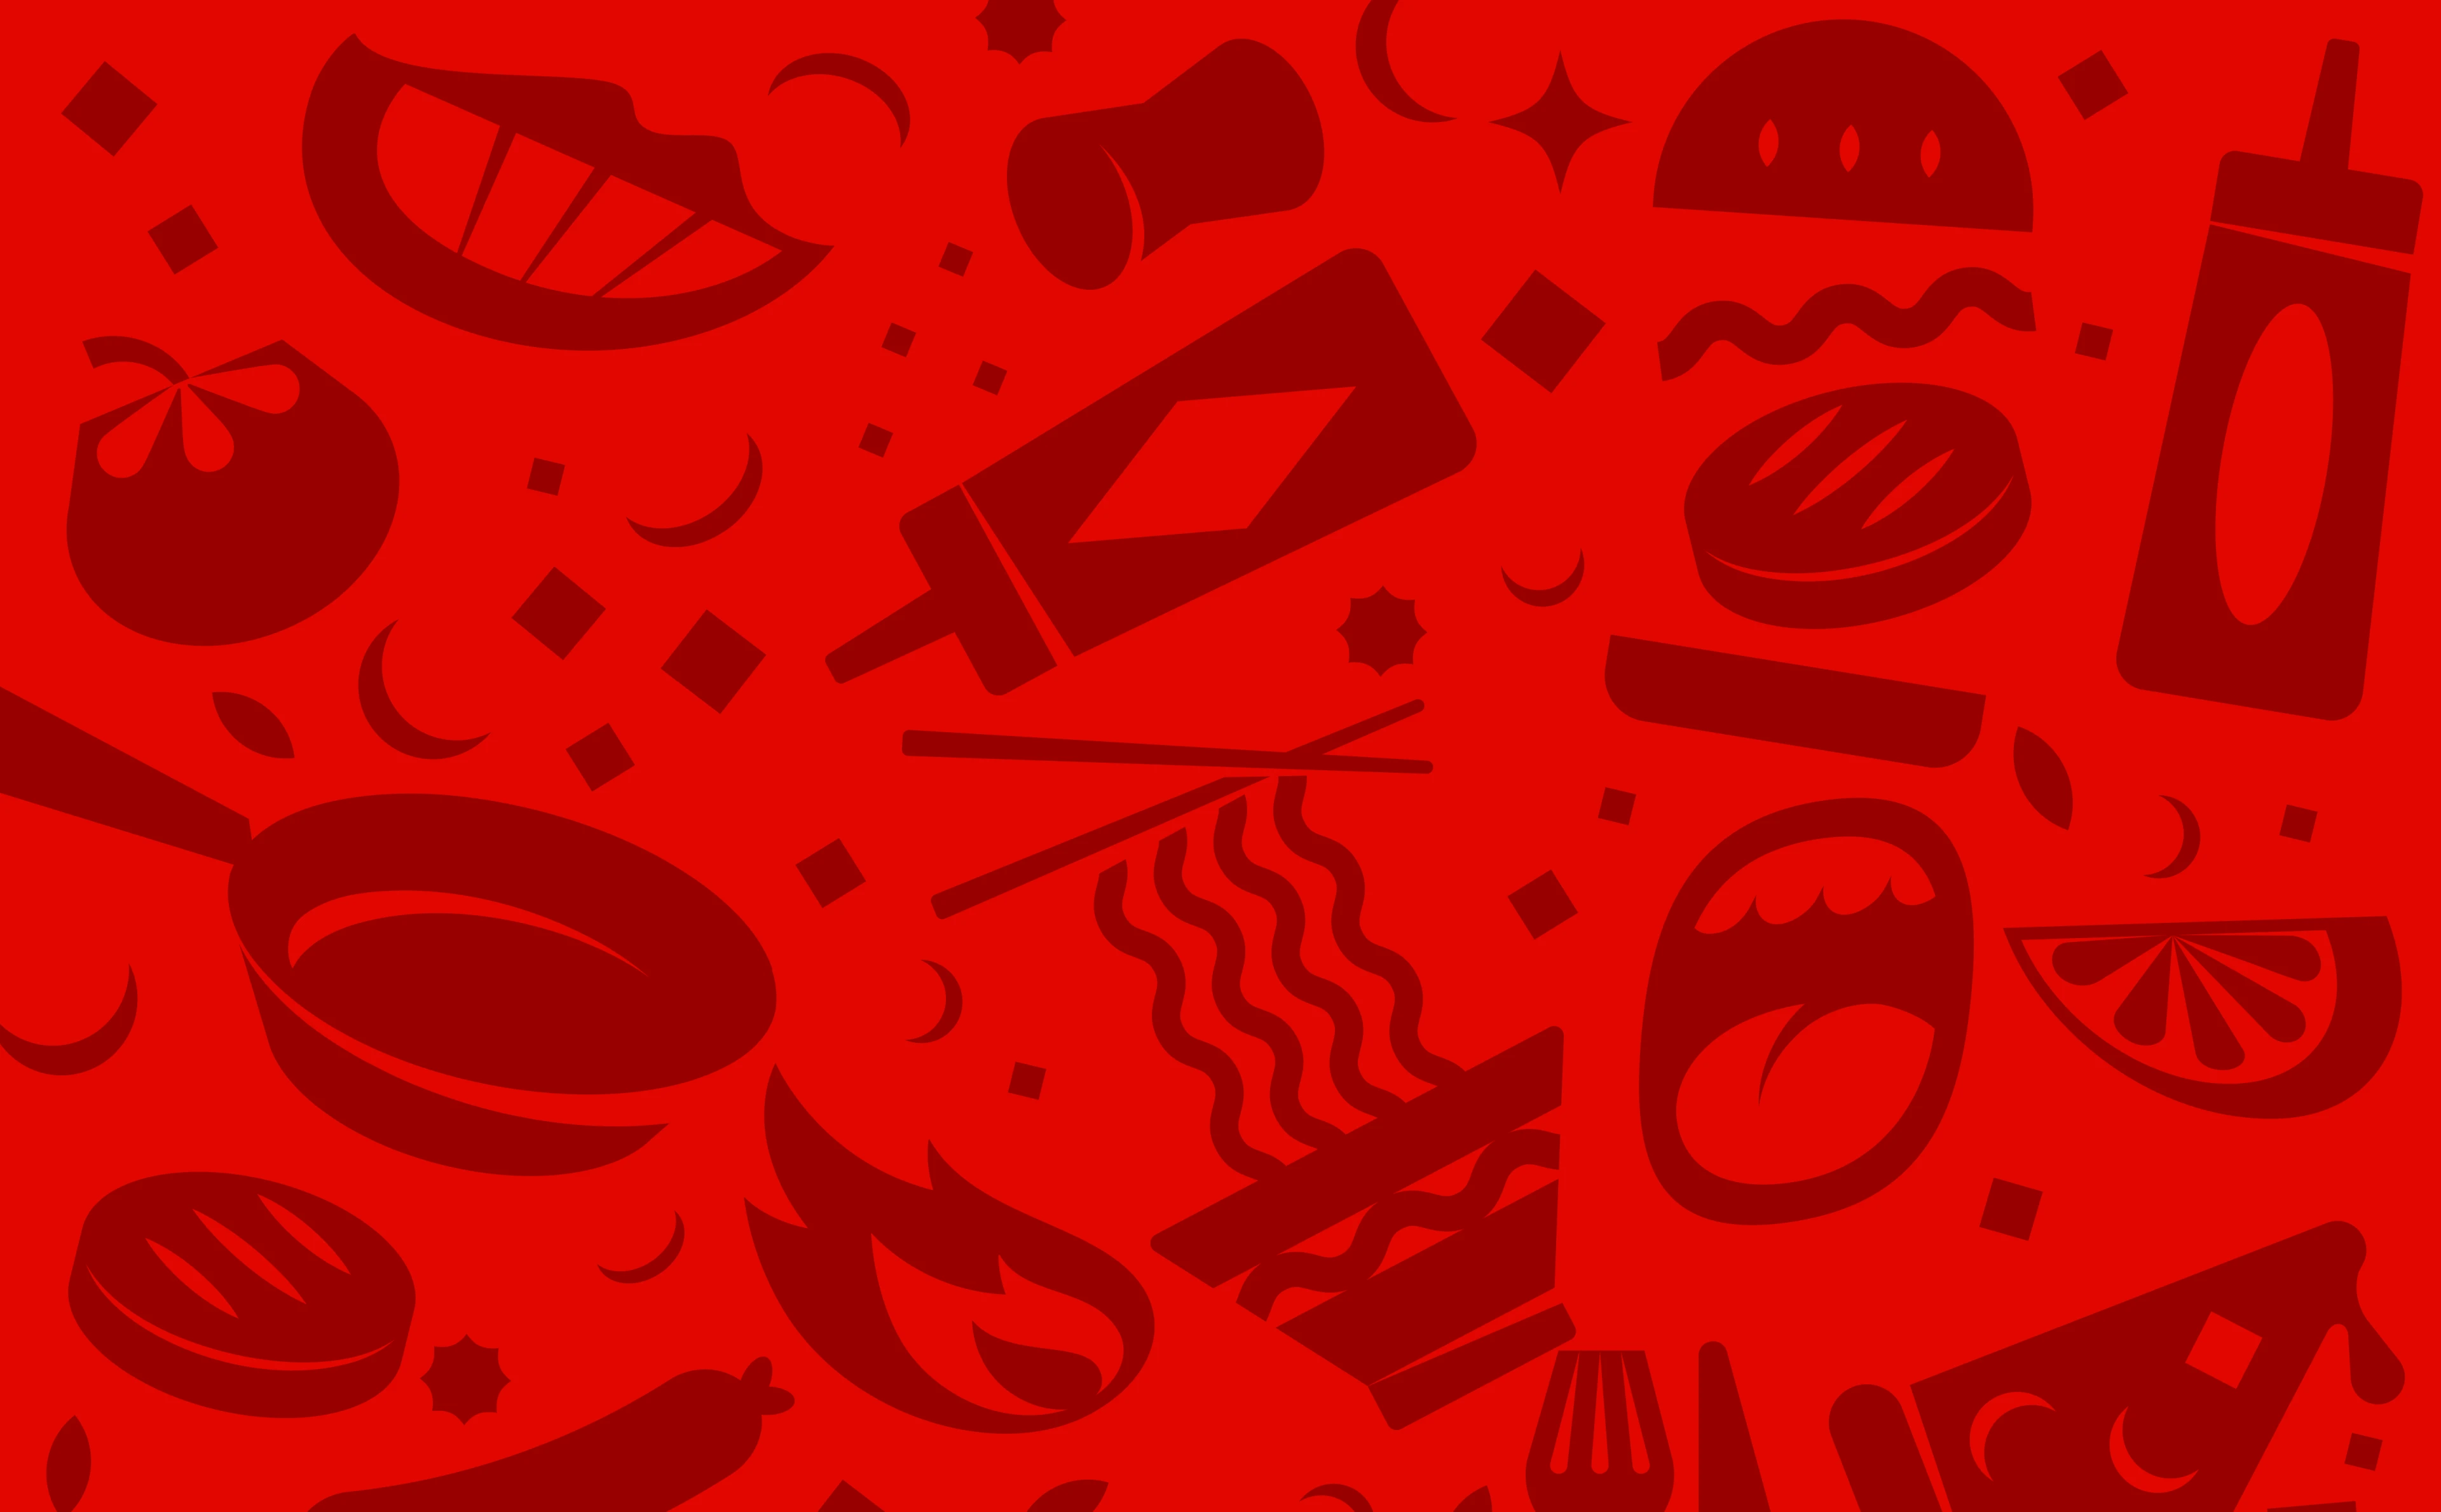 Red pattern design of the Impossible brand assets